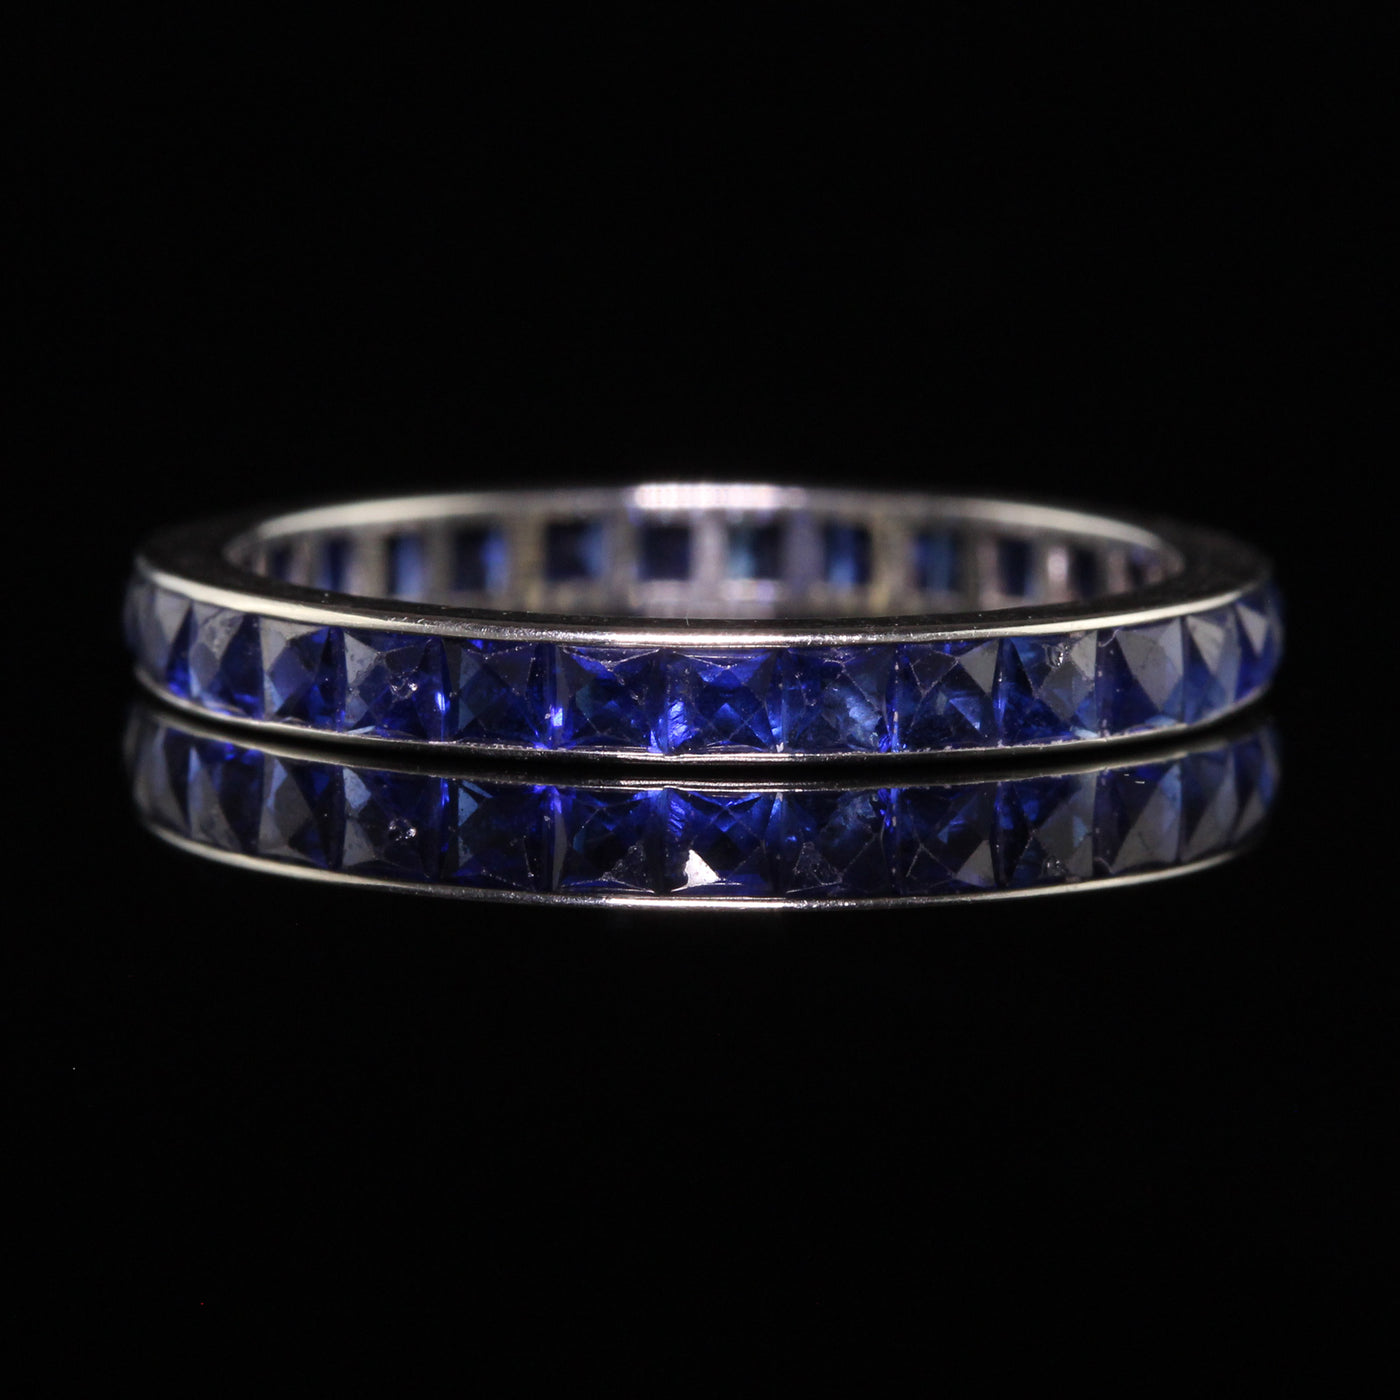 Antique Art Deco 18K White Gold French Cut Sapphire Eternity Band - Size 6 1/2